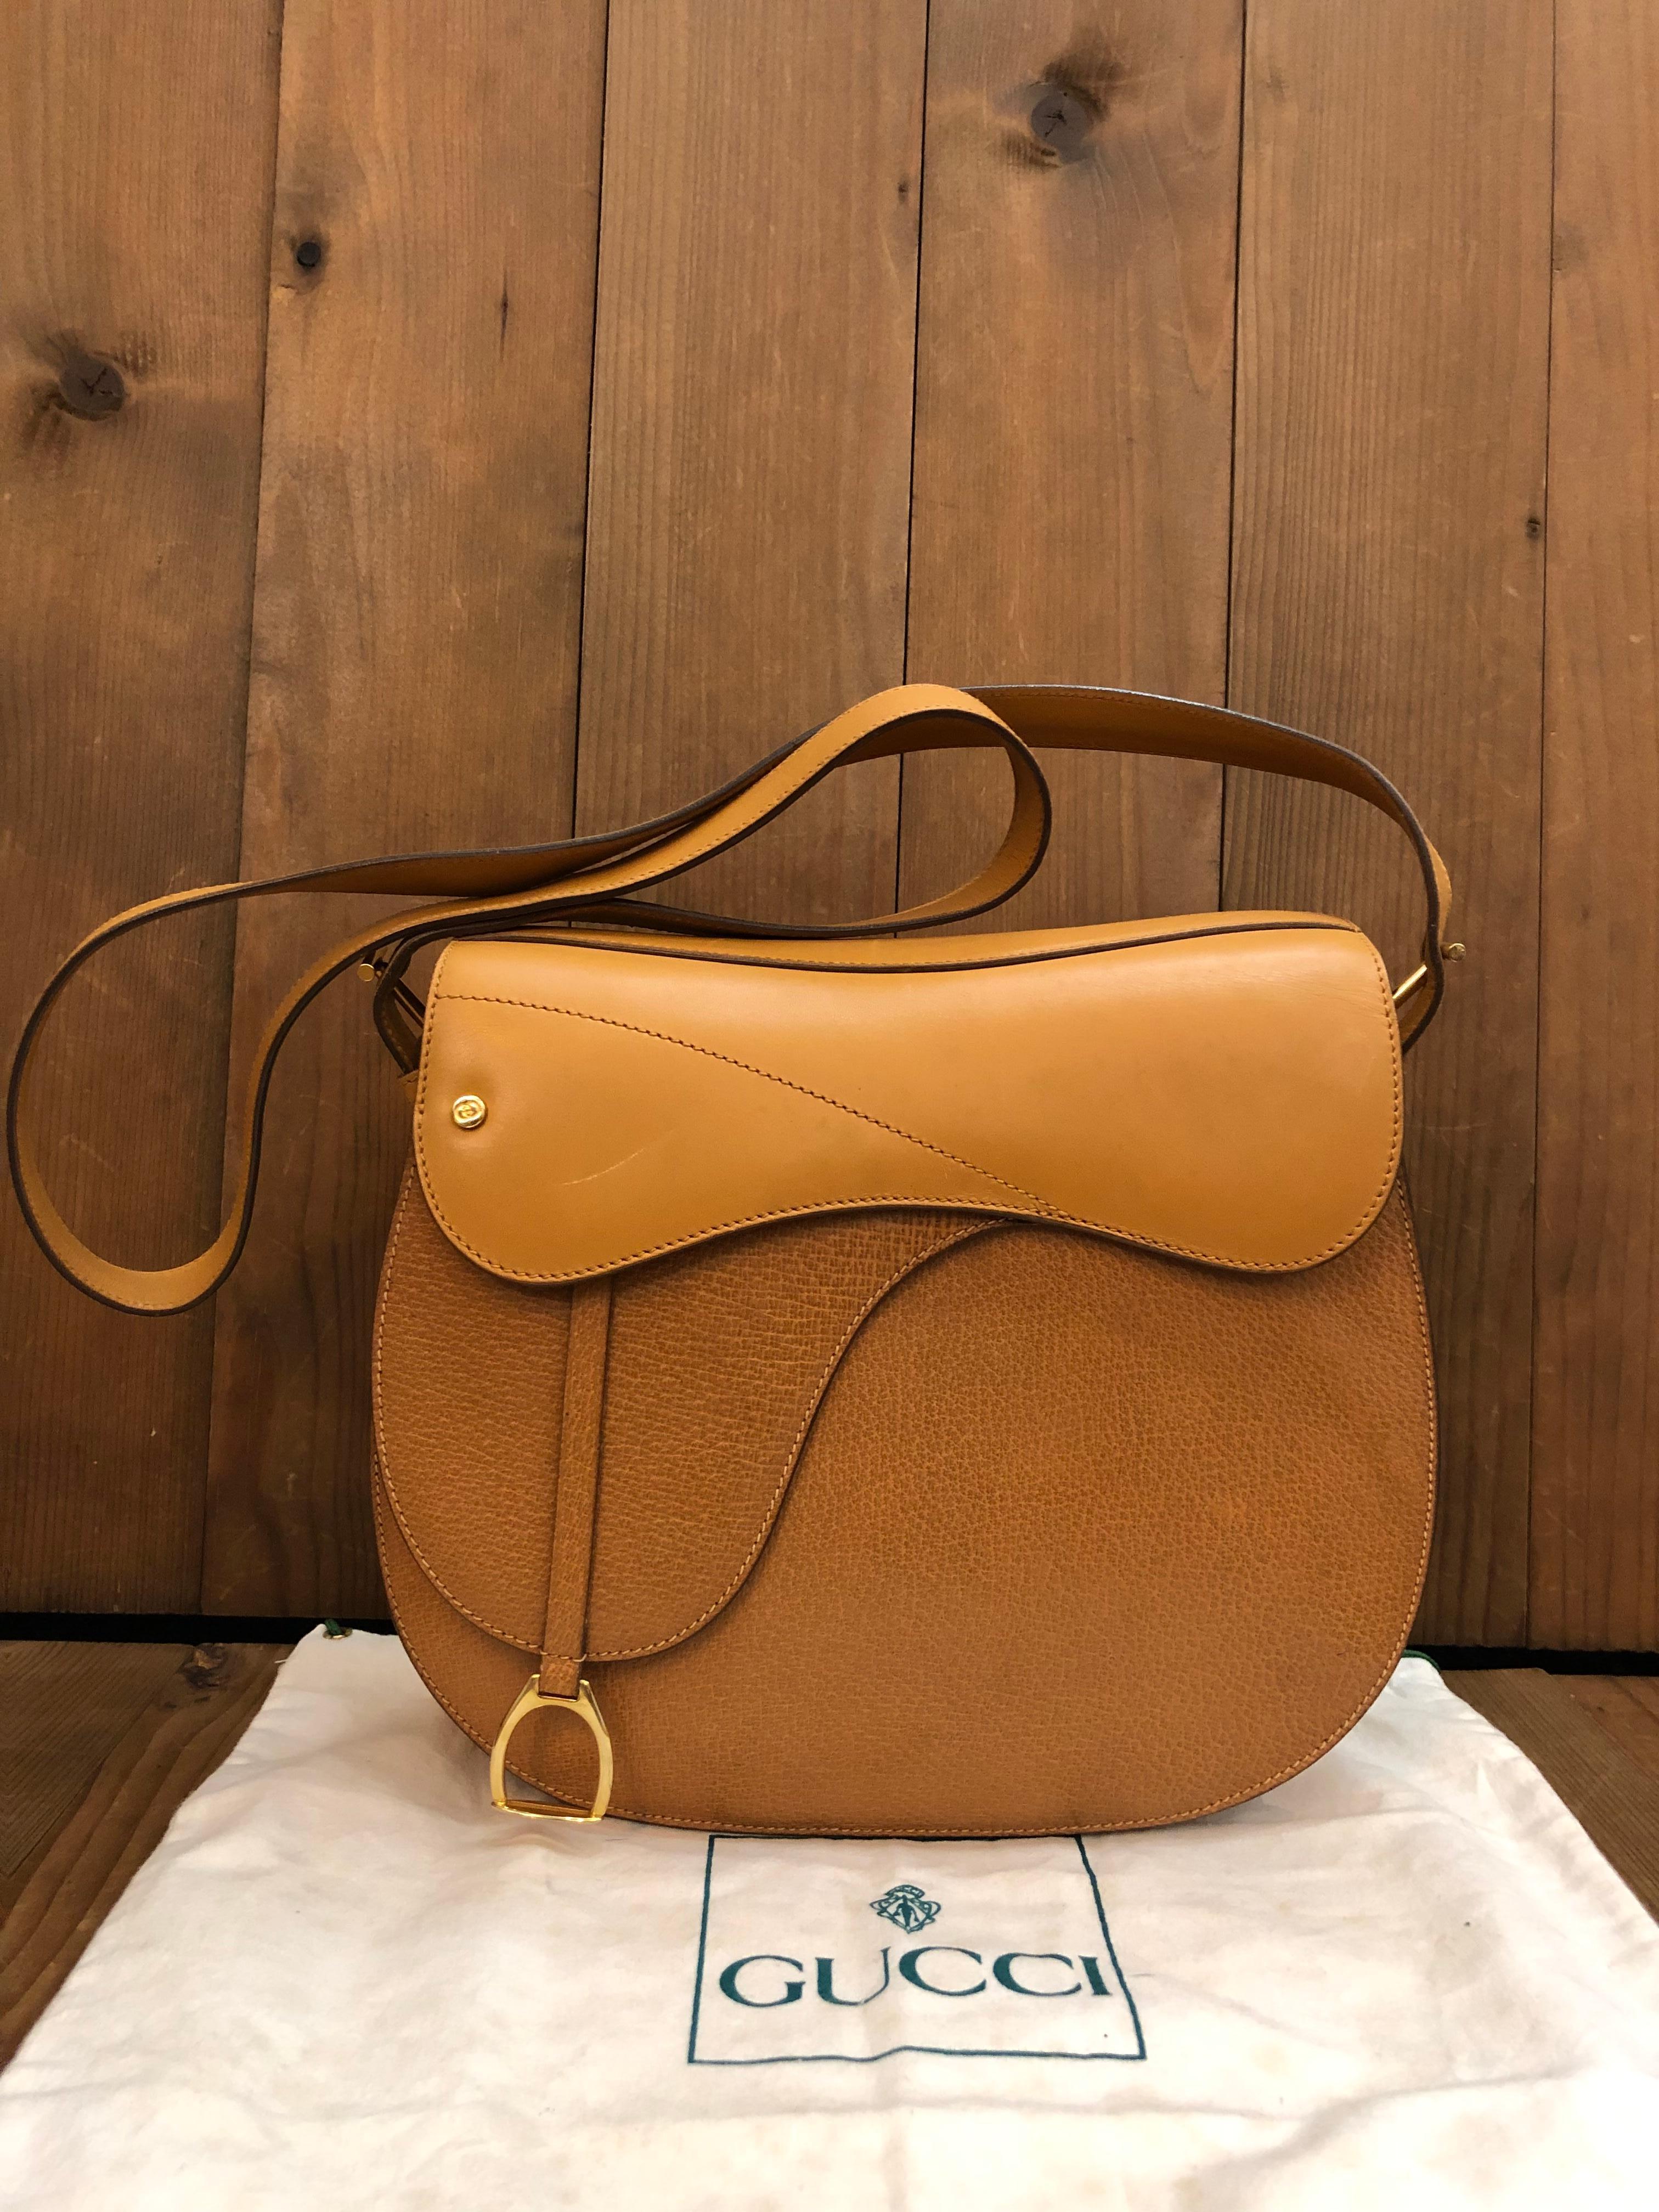 This 1980s vintage GUCCI saddle bag is crafted of smooth calfskin and pigskin leather in camel featuring gold toned hardware. Front magnetic snap closure opens to a beige leather interior featuring a zippered pocket. Made in Italy. Measures